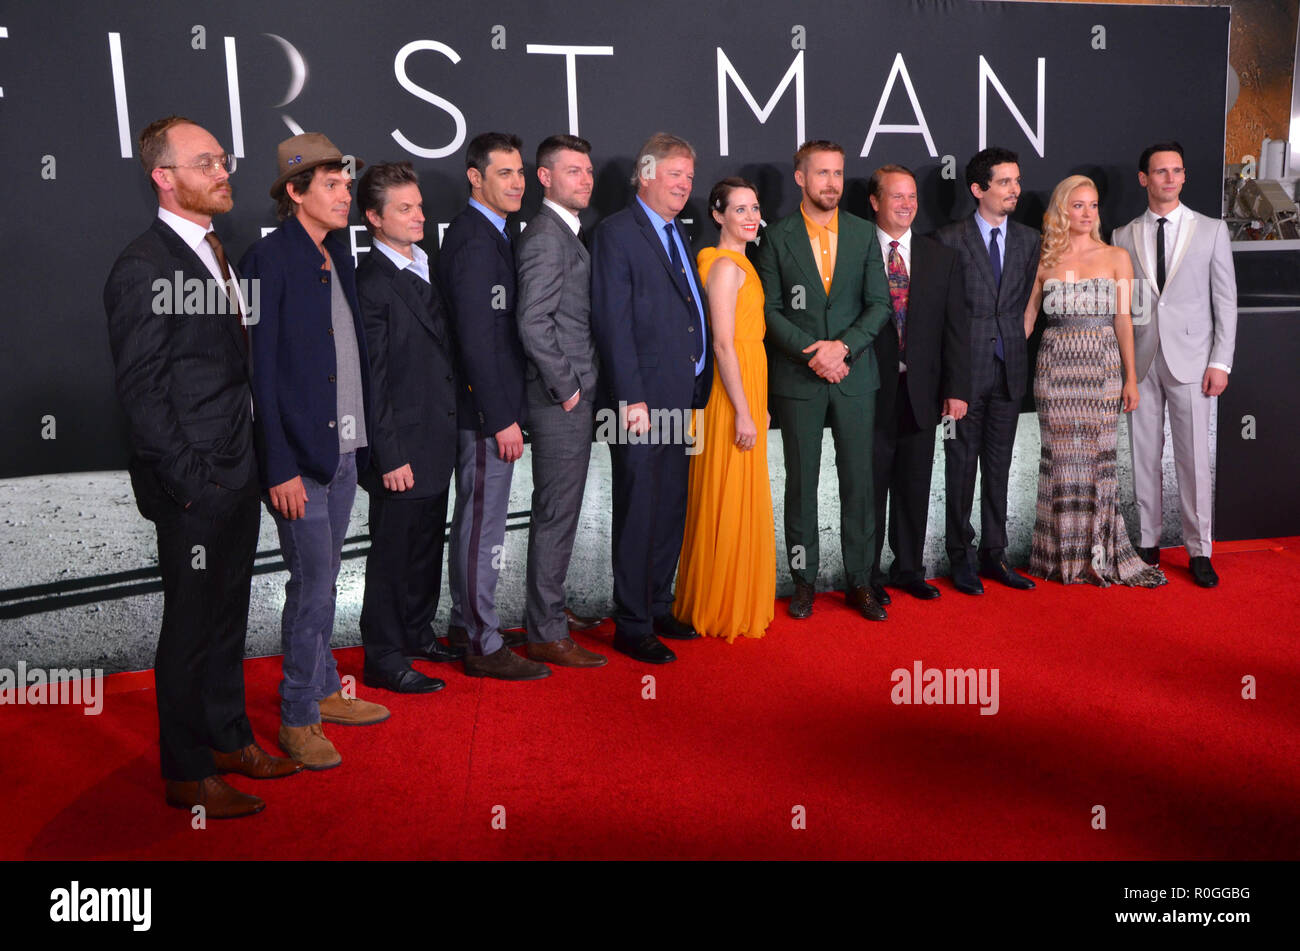 'First Man' Premiere - Arrivals  Featuring: Lukas Haas, Patrick Fugit, Josh Singer, Claire Foy, Ryan Gosling, Damien Chazelle Where: Washington DC, District Of Columbia, United States When: 04 Oct 2018 Credit: WENN.com Stock Photo